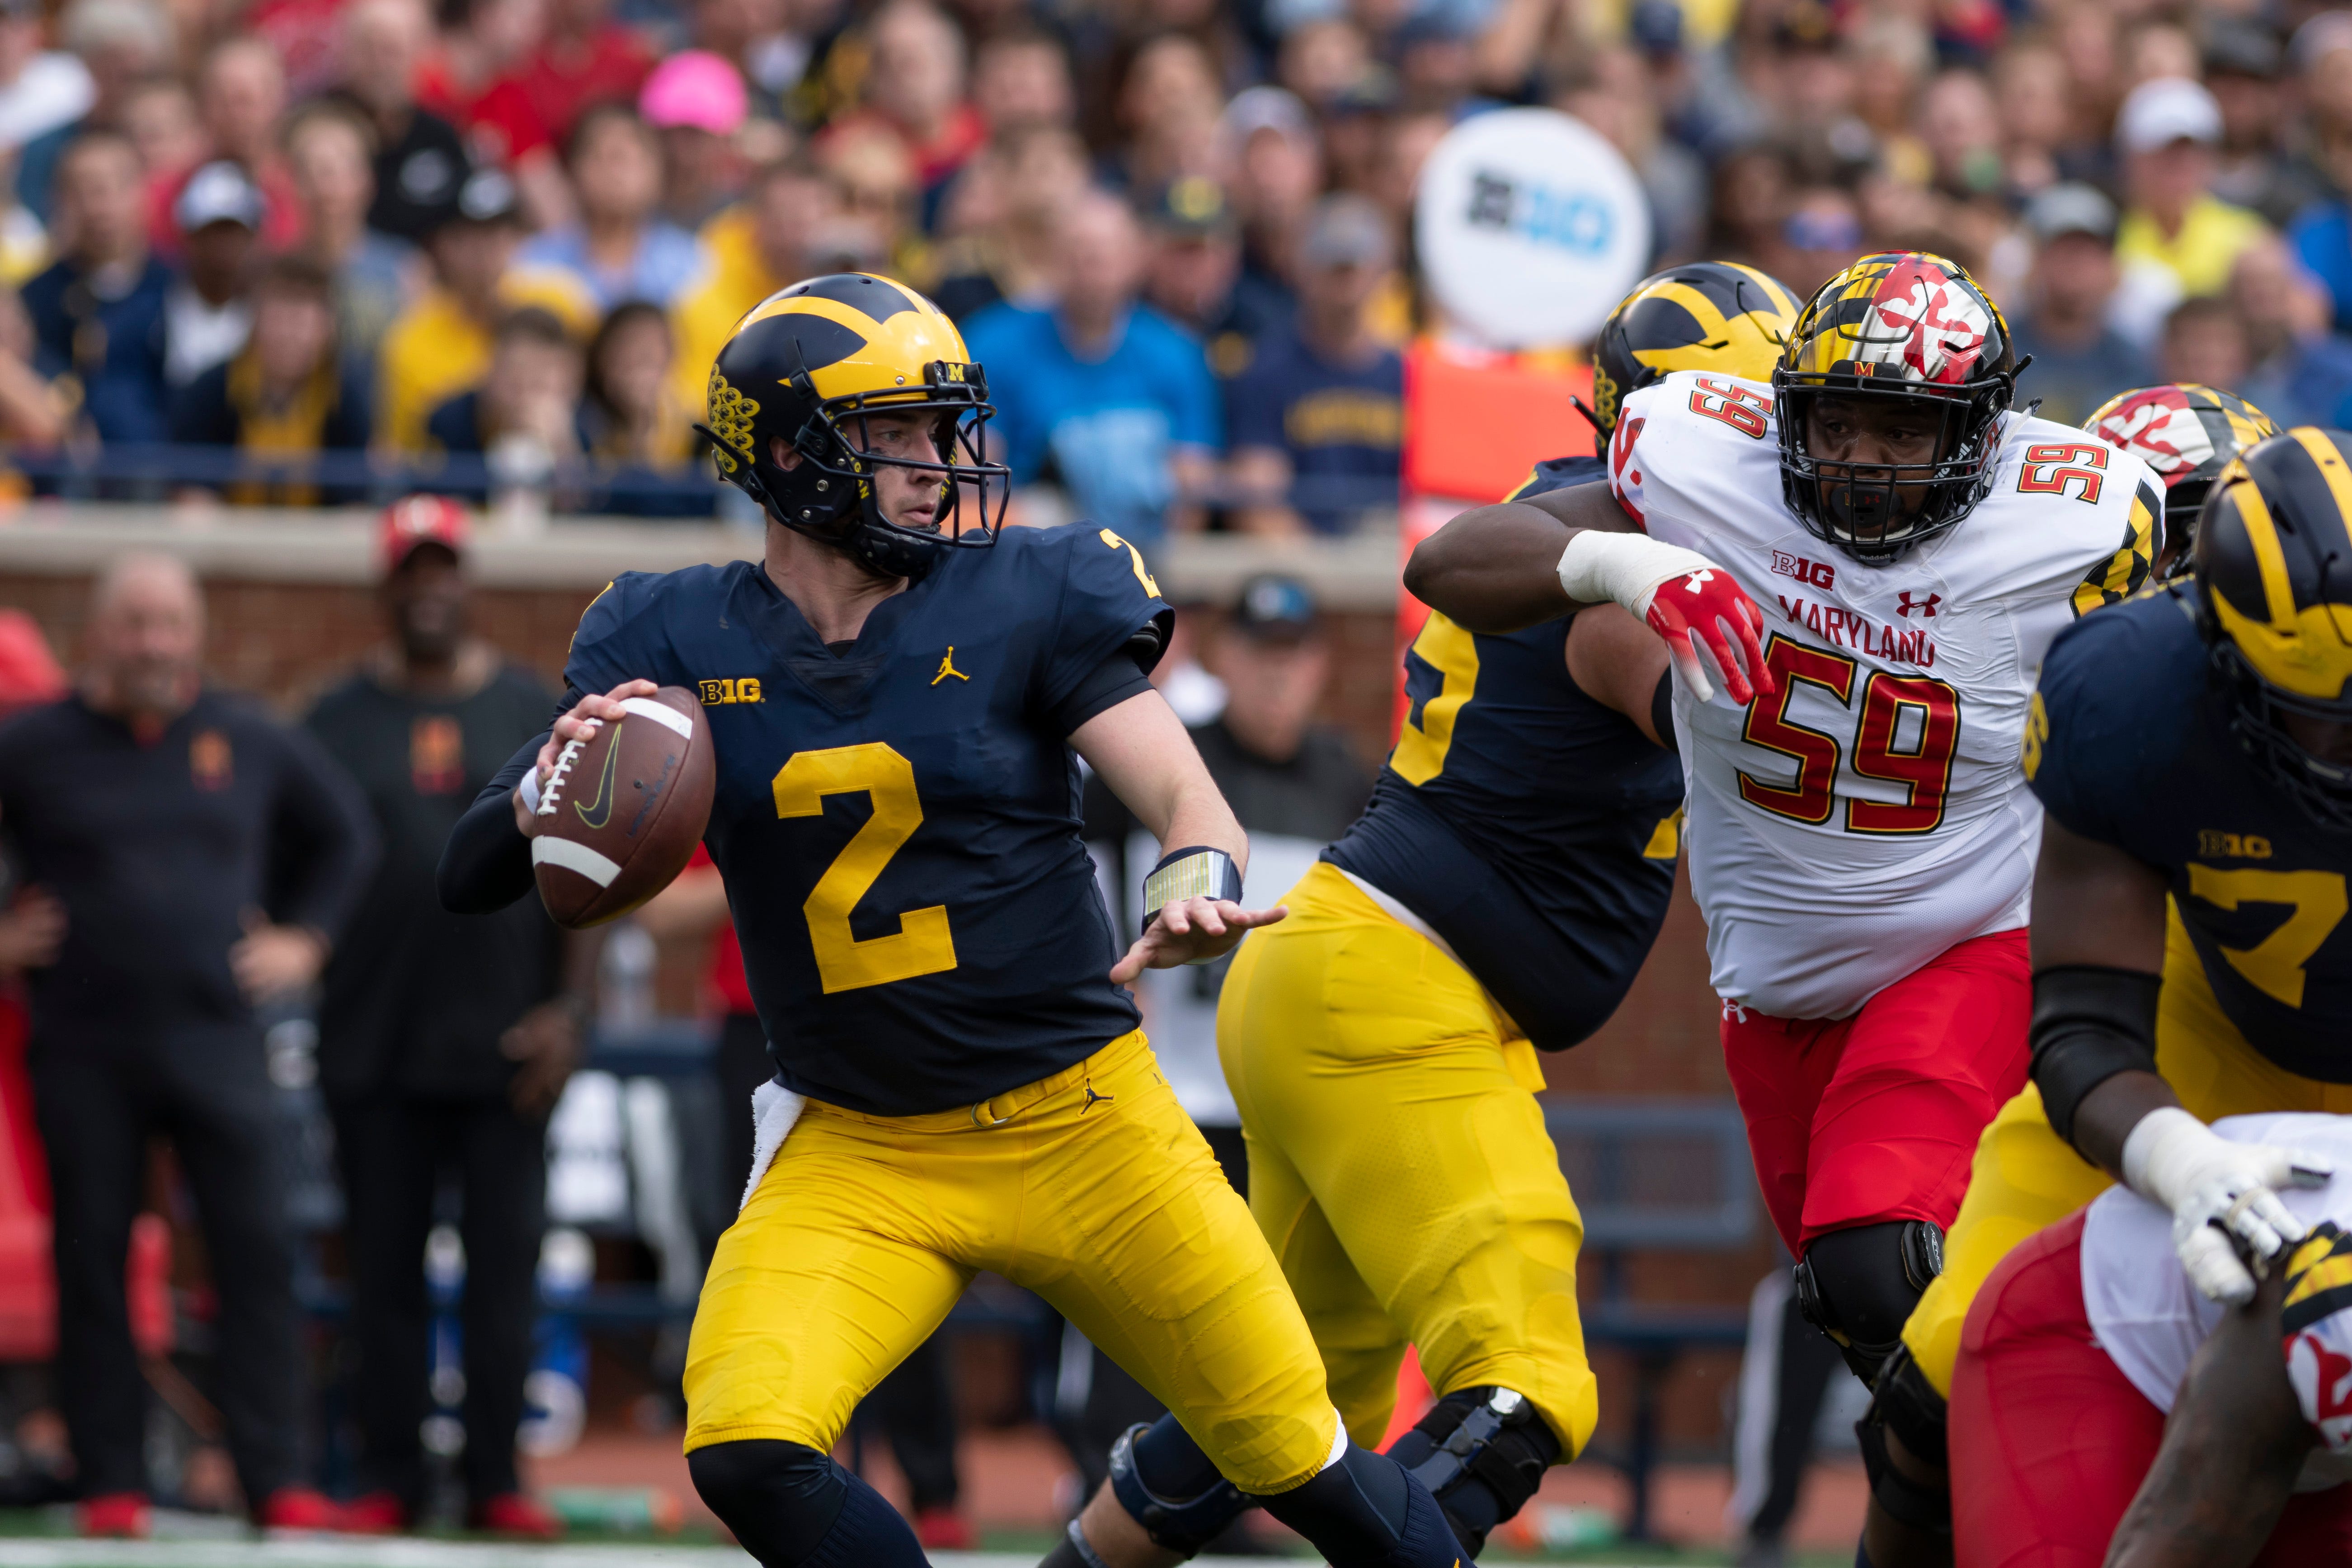 Michigan quarterback Shea Patterson looks for an open man against Maryland.